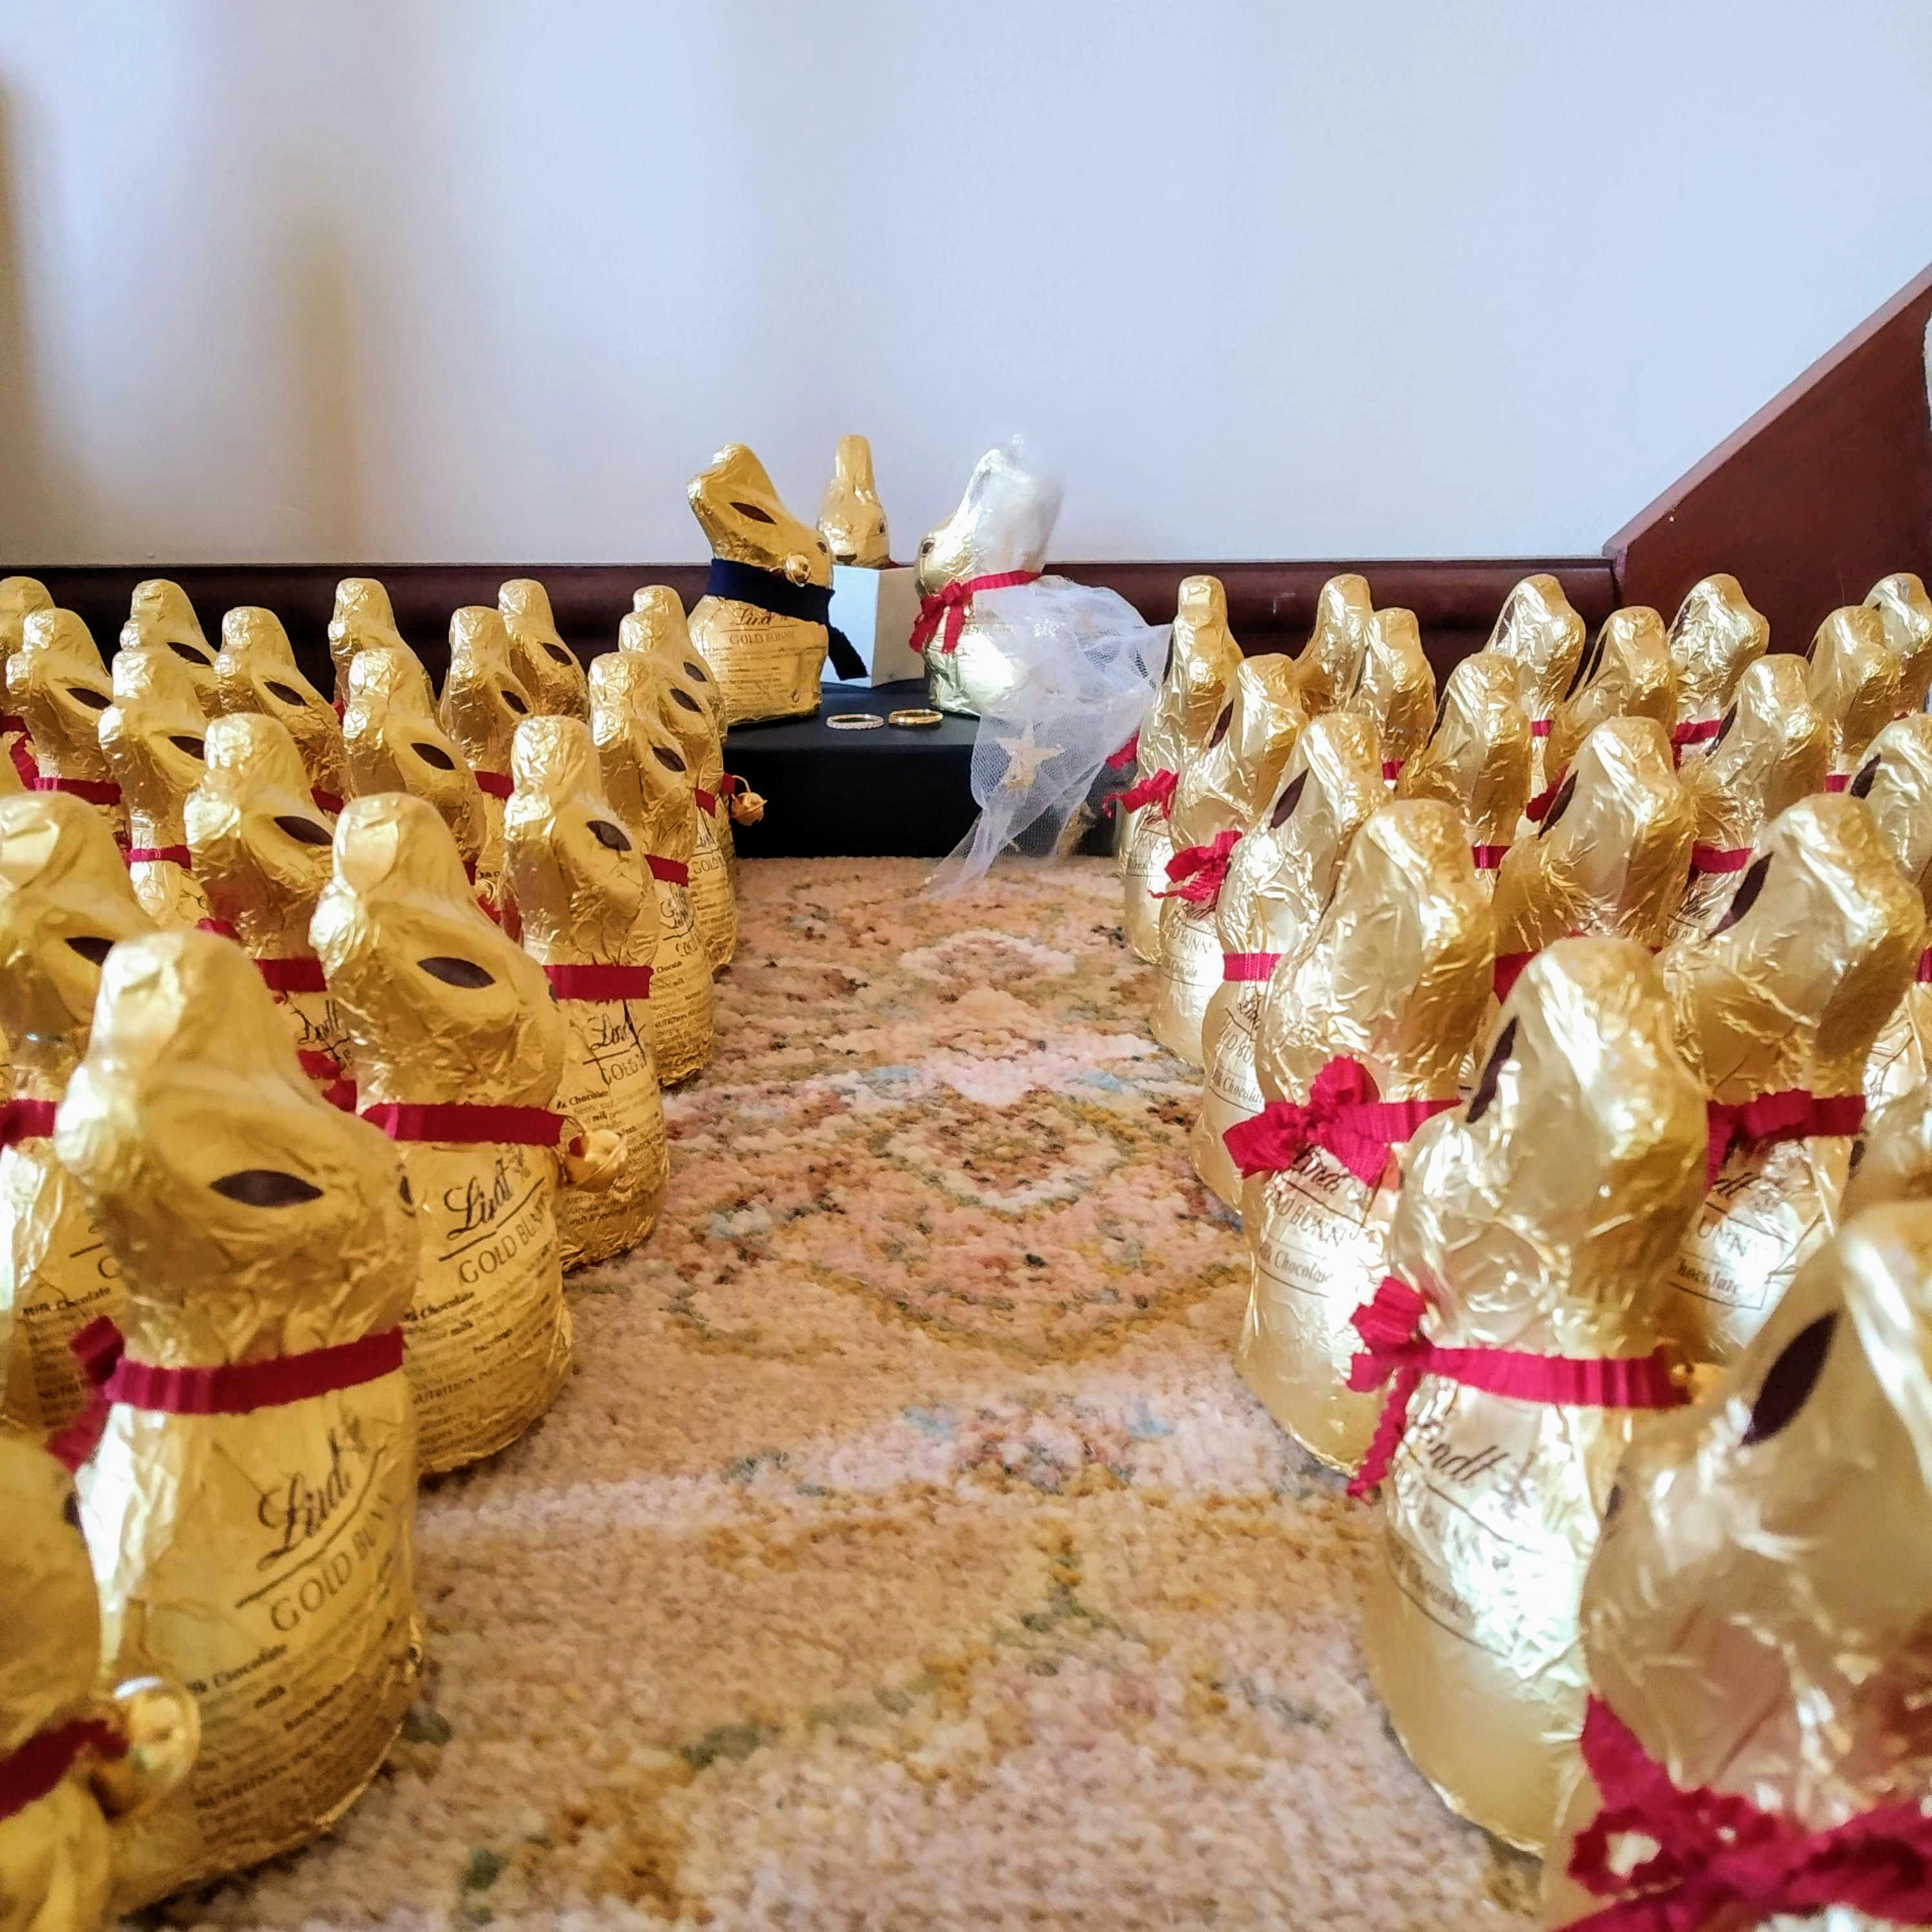 Over 100 chocolate bunnies lined up as if they are attending a wedding.